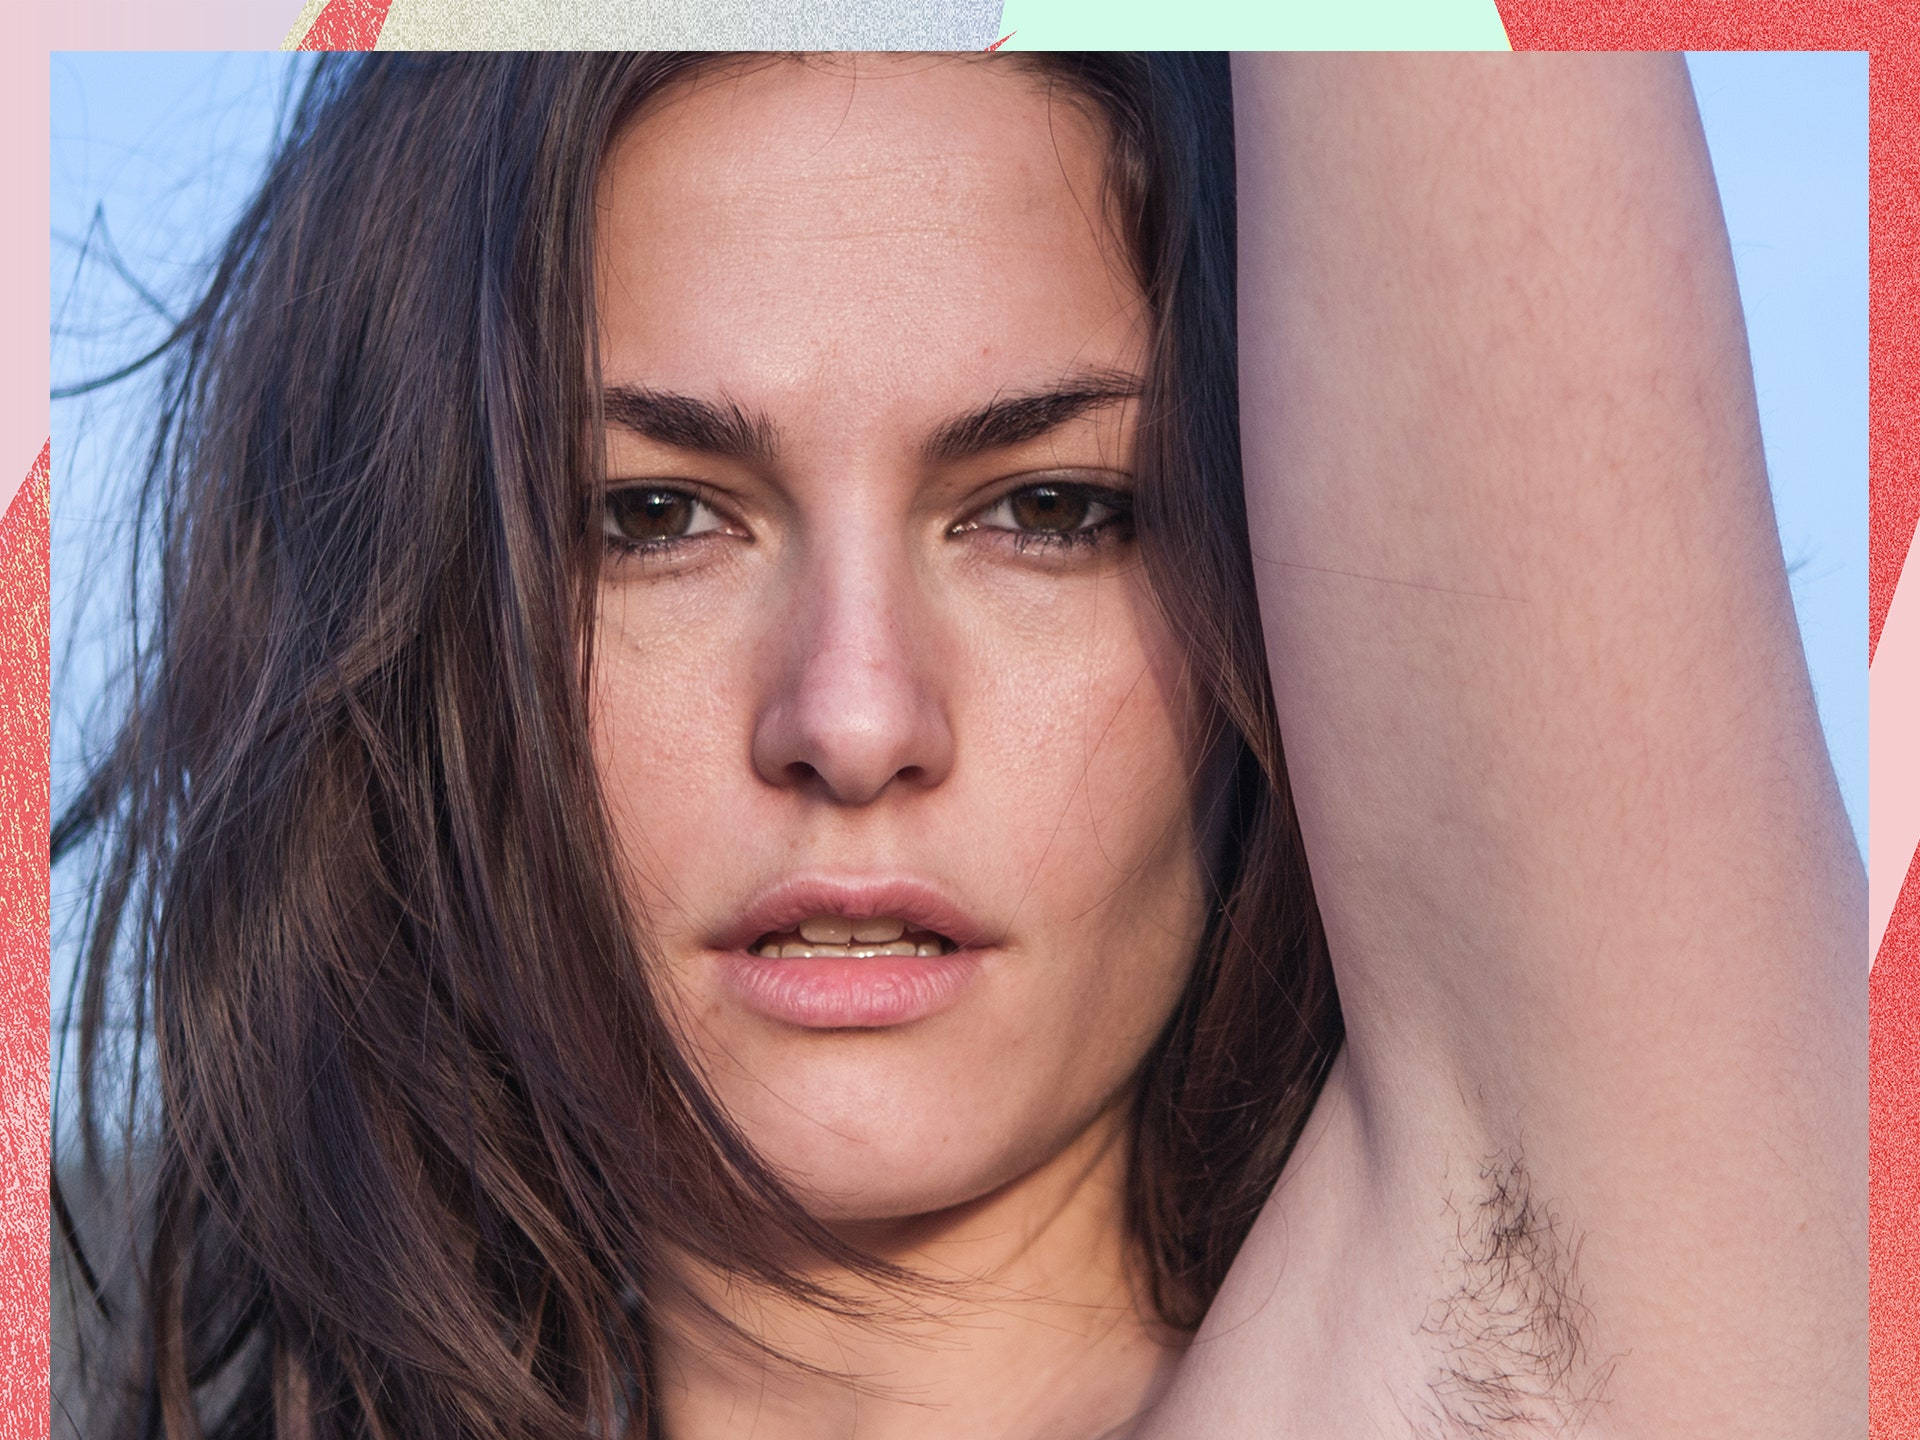 dawn uselman recommends lovely hairy women tumblr pic